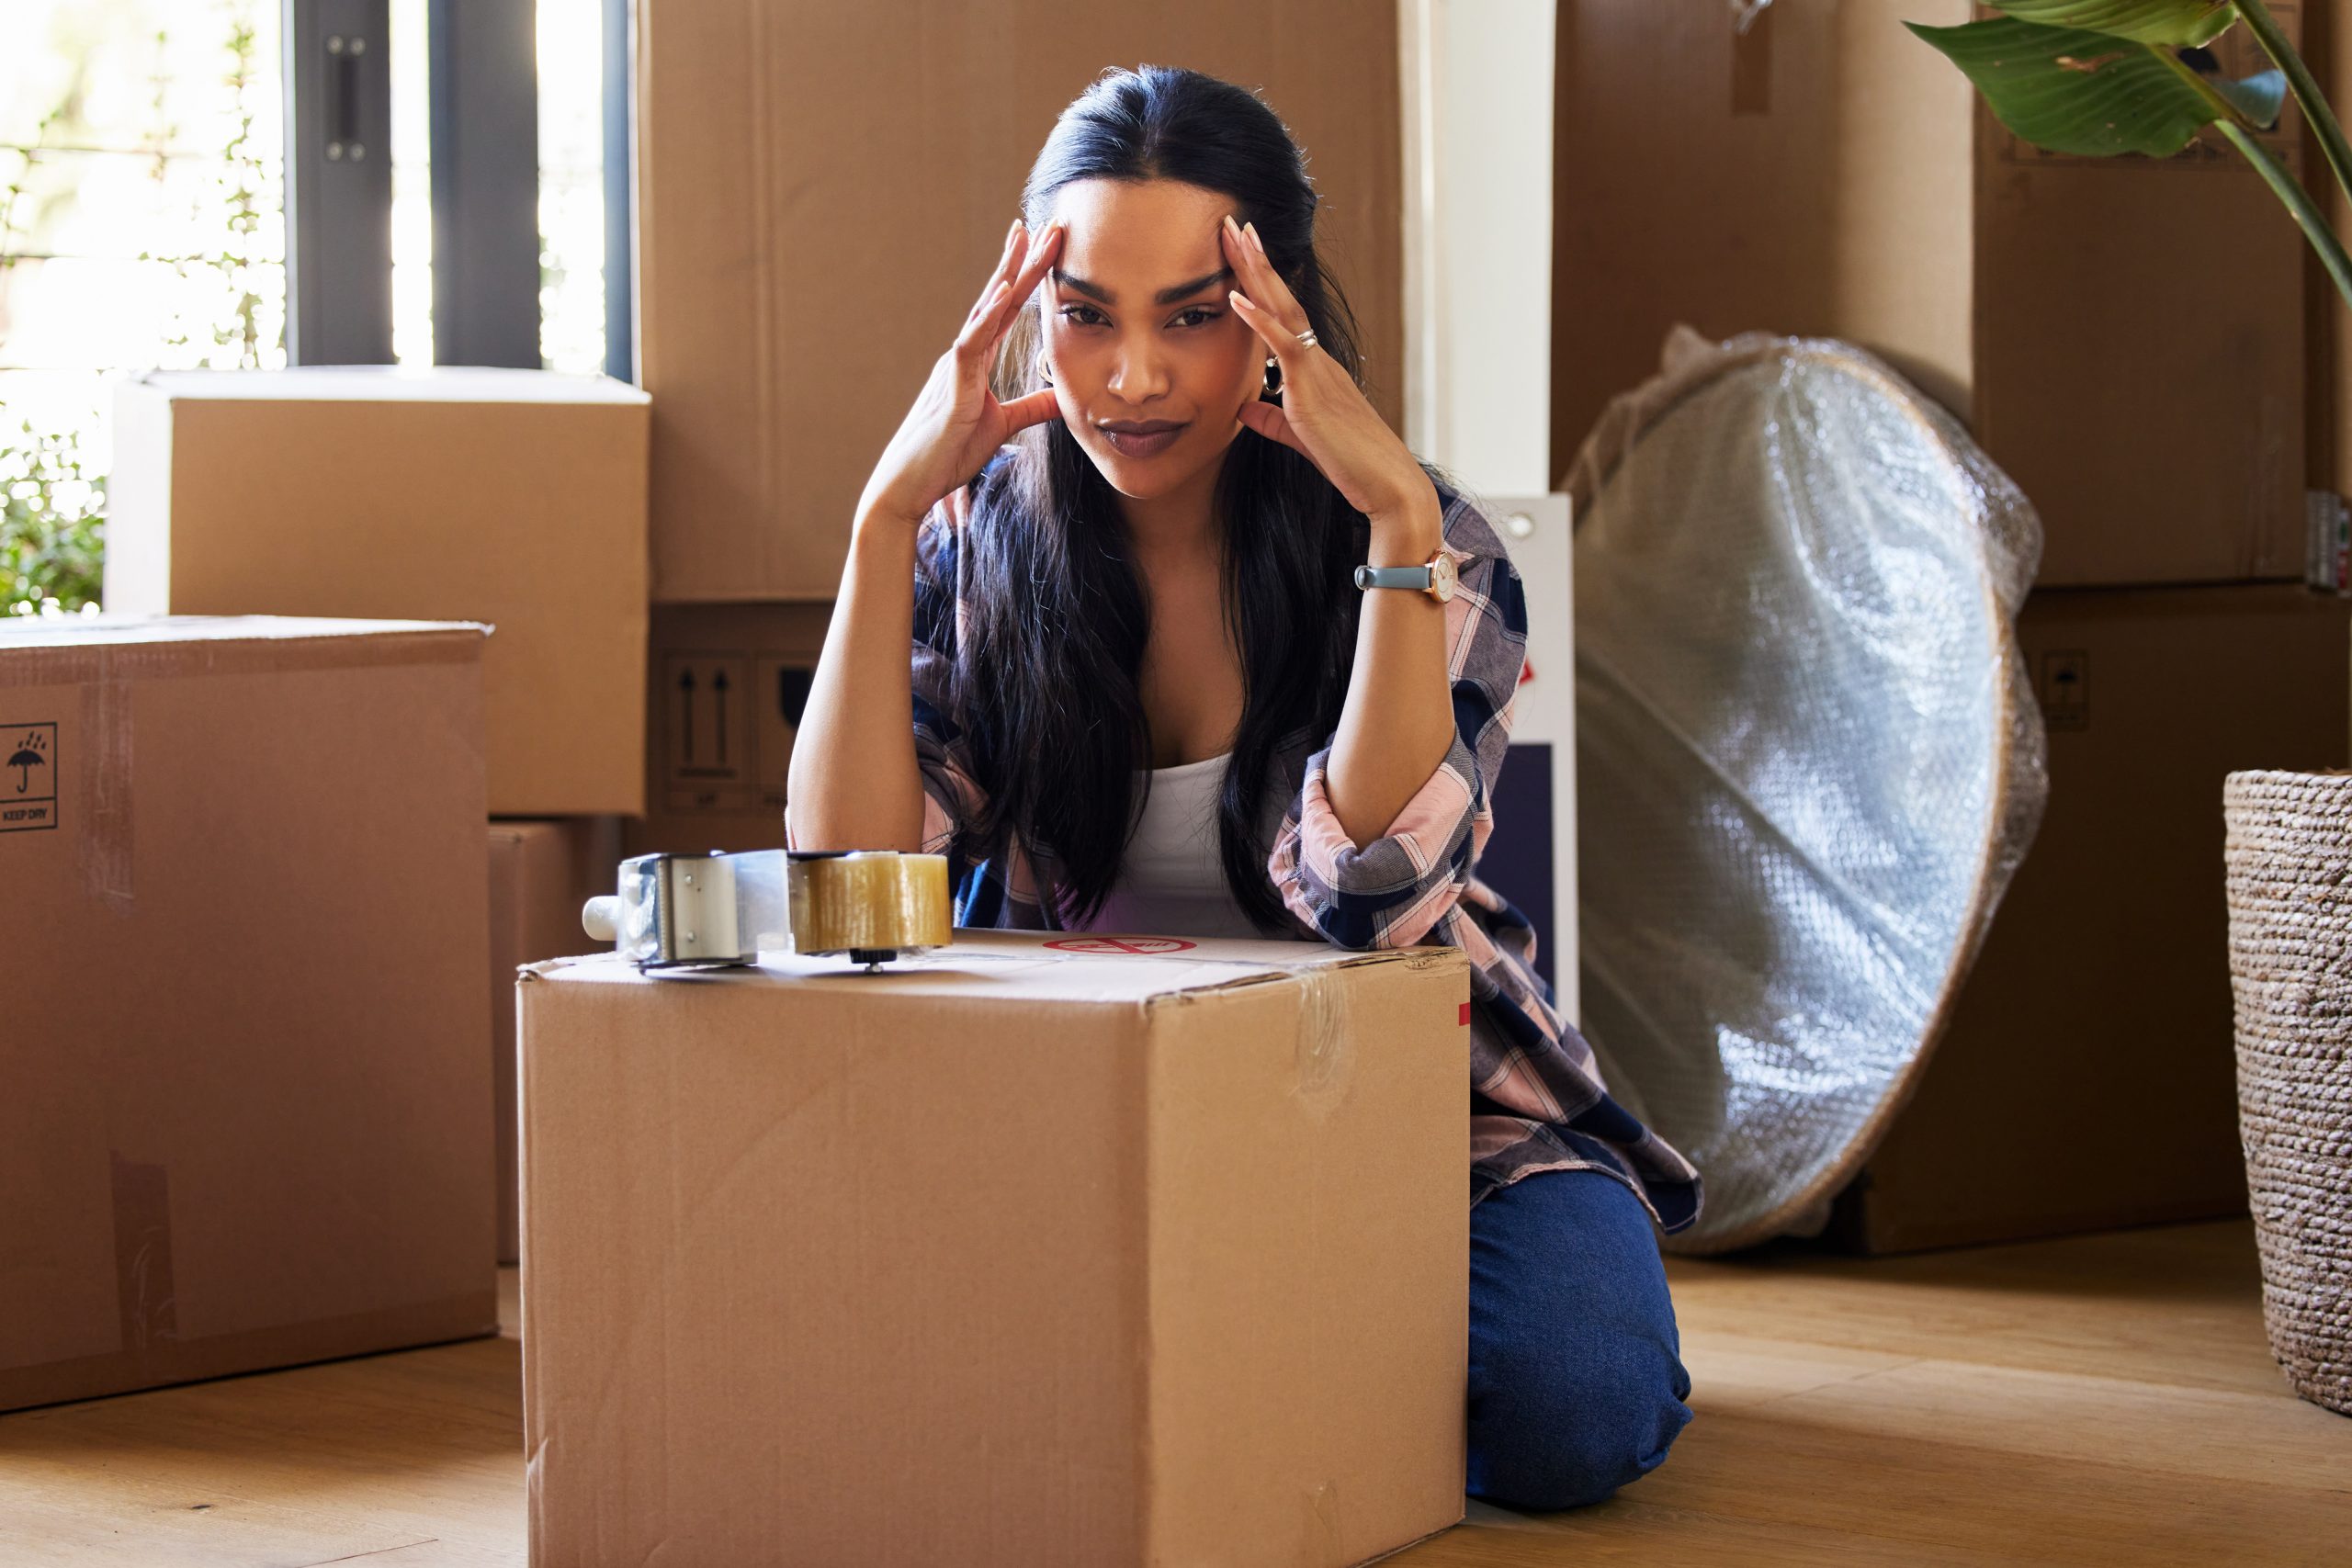 Can't Trust My Long Distance Boyfriend That I Am About To Move In With. Should I Walk Away?